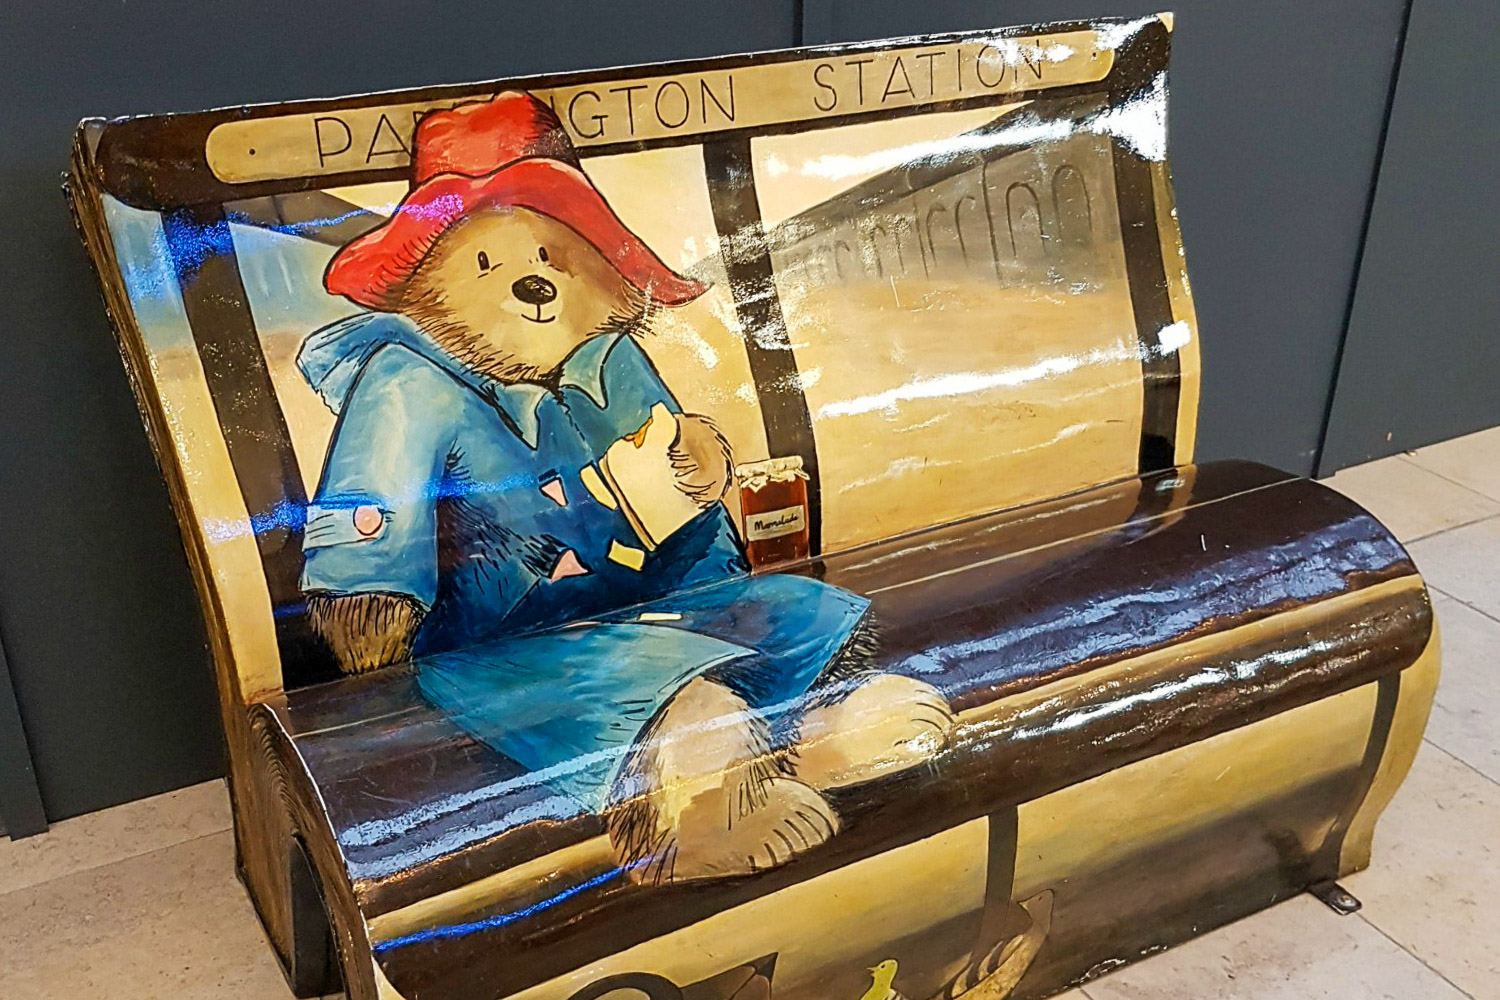 The Paddington bear bench at Paddington station - if you're hoping to find Paddington Bear in London, the station is the best place to start your own Paddington bear trail in London